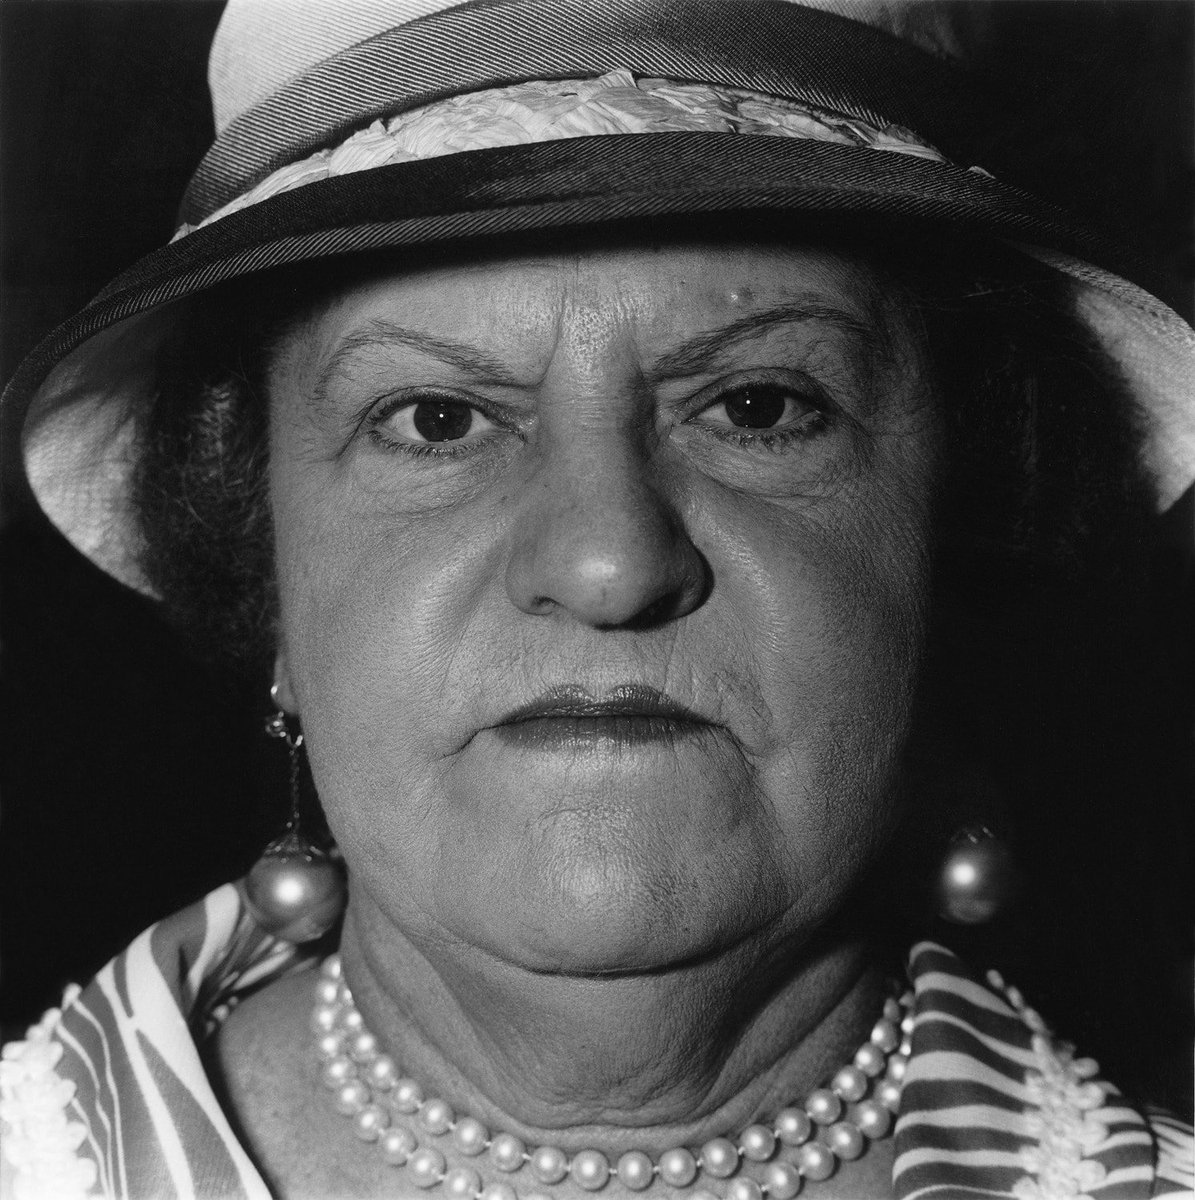 📸 Diane Arbus. Woman with Pearl Necklace and Earings, NYC, 1967.